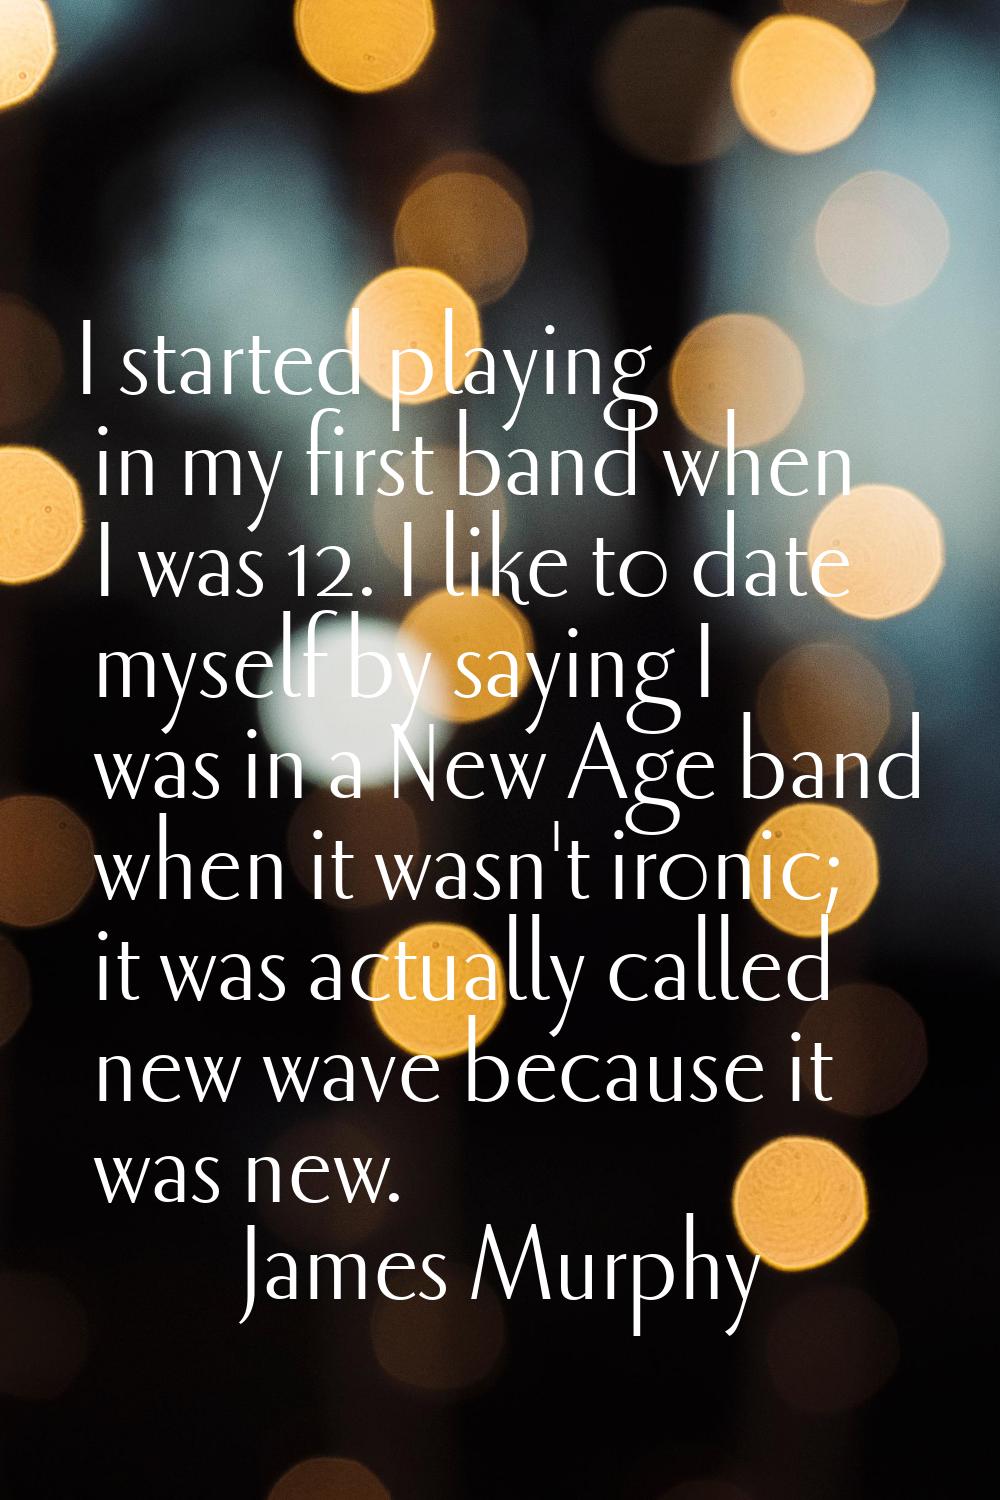 I started playing in my first band when I was 12. I like to date myself by saying I was in a New Ag